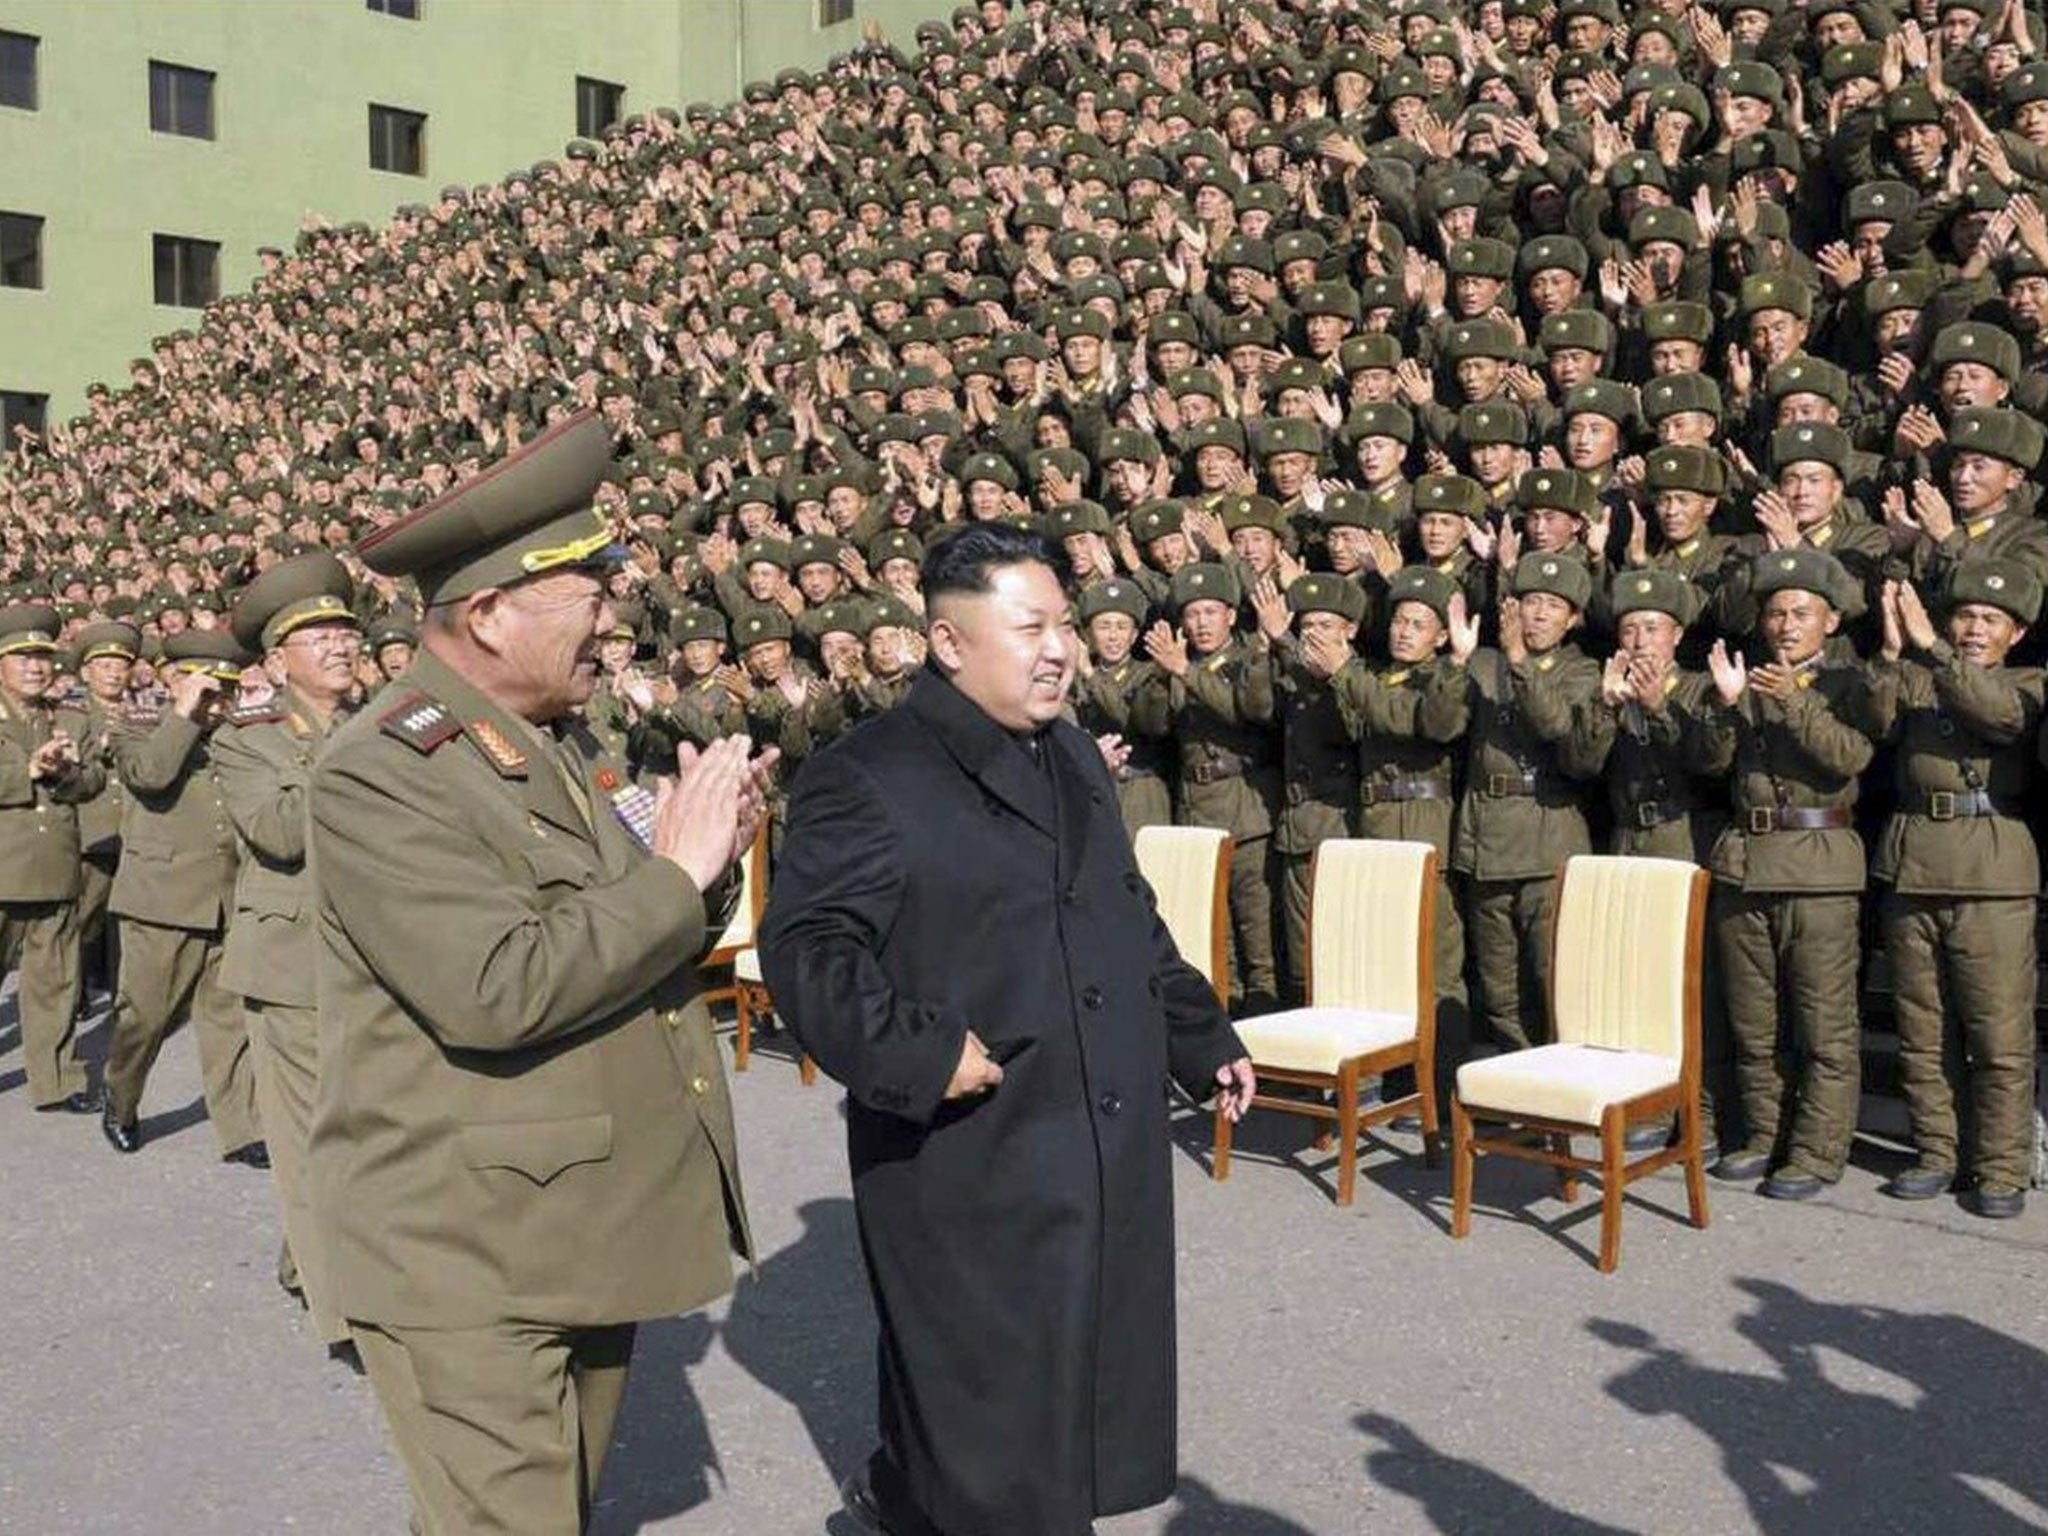 Spot the women: File photo from KCNA on 5 November 2014 shows North Korean leader Kim Jong-un attending an event with military commanders